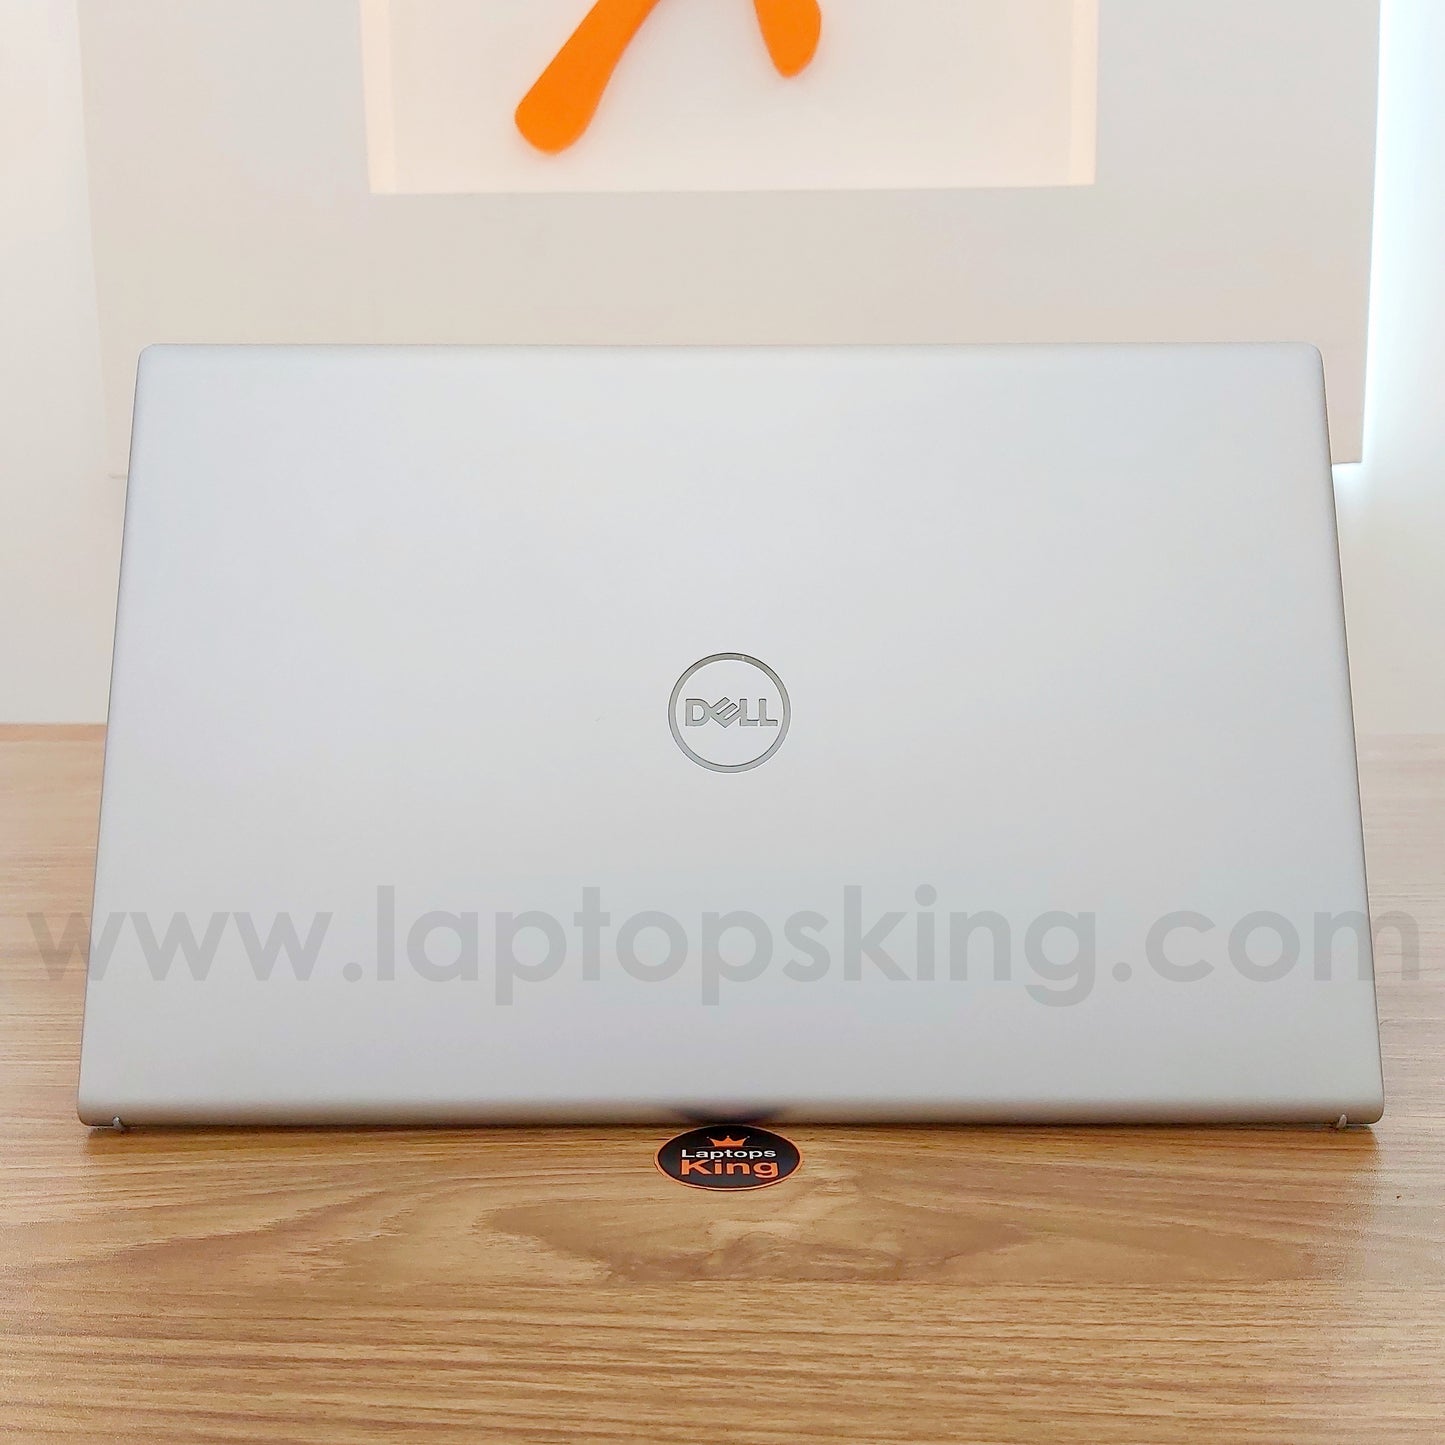 Dell Inspiron 15 5510 i5-11320h Iris Xe 15.6" Laptop Offers (New Open Box) Gaming laptop, Graphic Design laptop, best laptop for gaming, best laptop for graphic design, computer for sale Lebanon, laptop for video editing in Lebanon, laptop for sale Lebanon, best graphic design laptop,	best video editing laptop, best programming laptop, laptop for sale in Lebanon, laptops for sale in Lebanon, laptop for sale in Lebanon, buy computer Lebanon, buy laptop Lebanon.